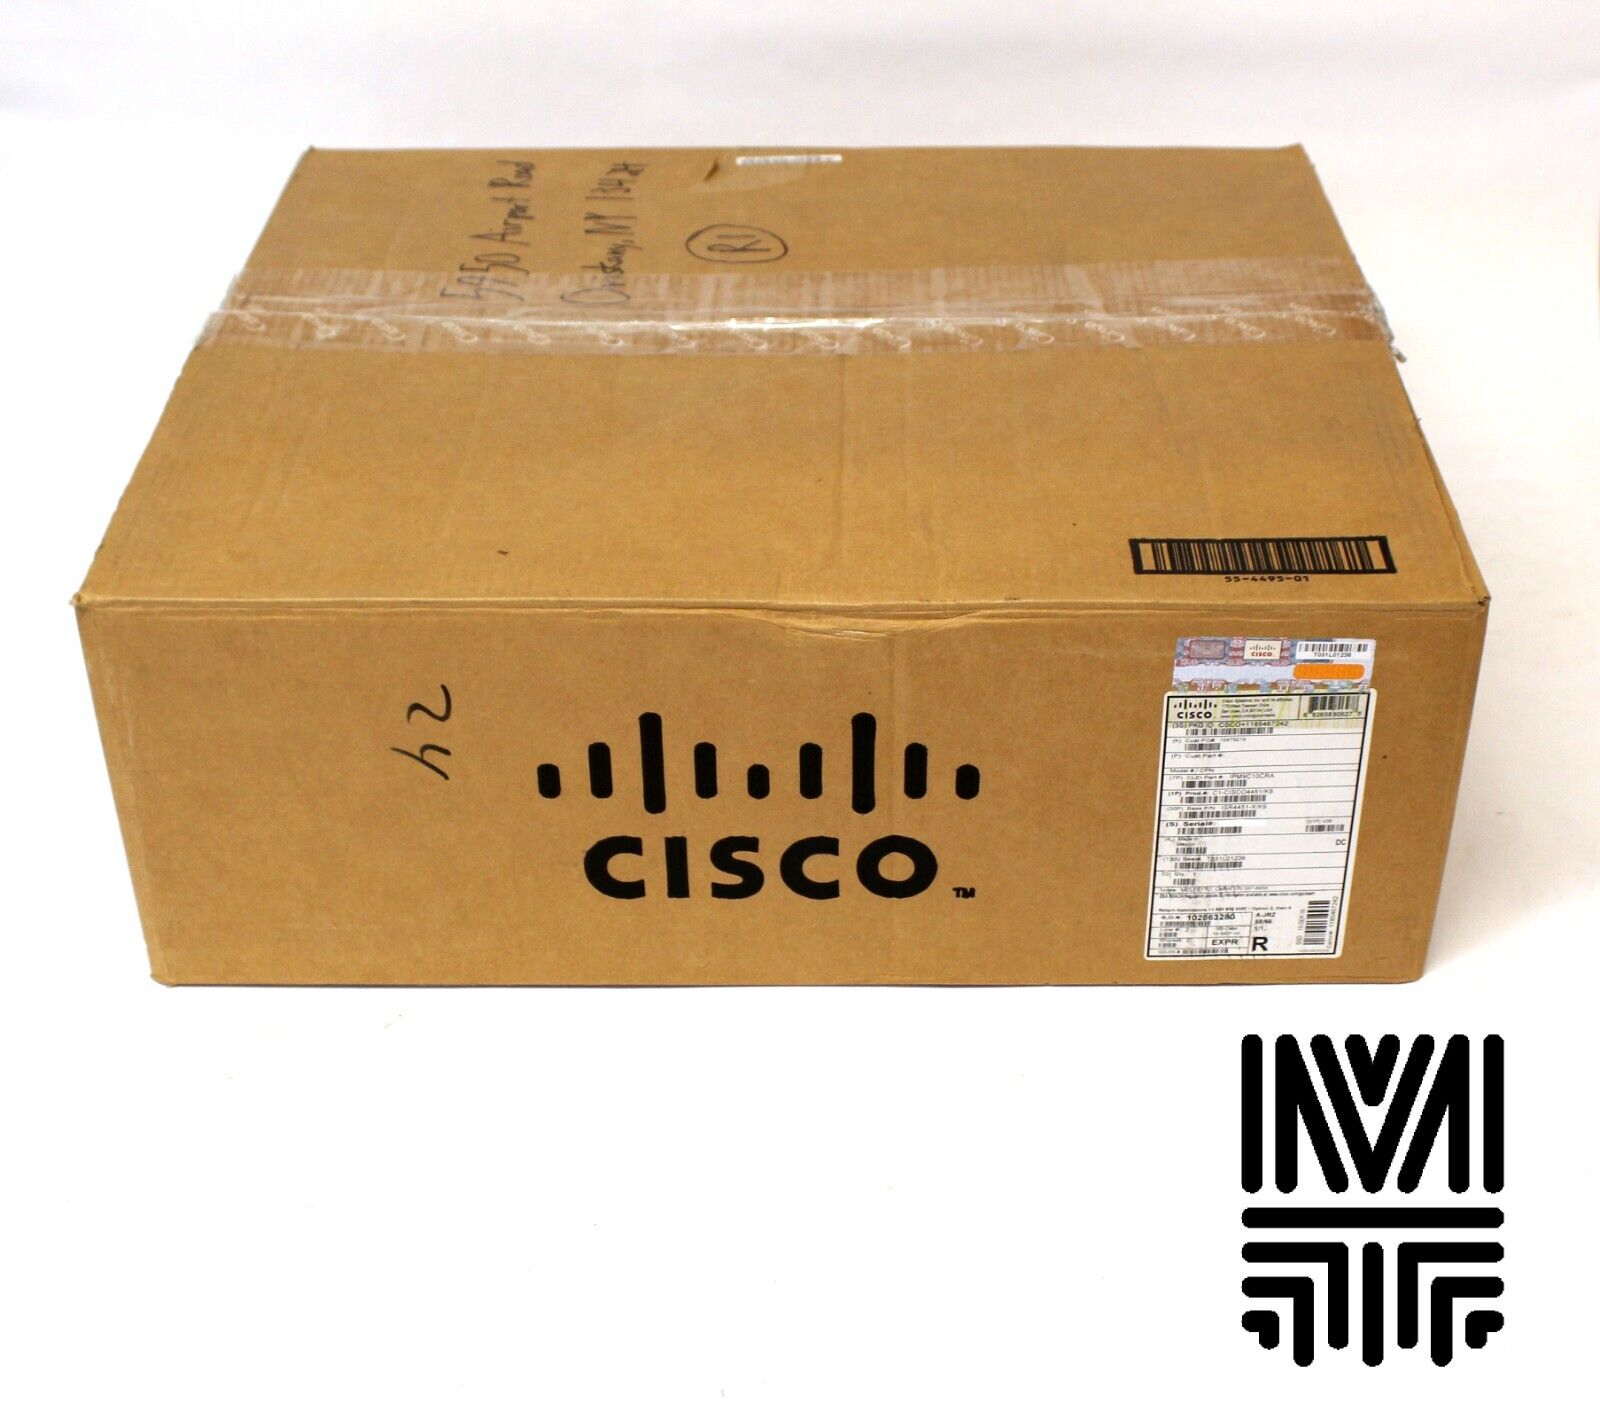 Cisco ISR4451-X-VSEC/K9 Integrated Services Router Great Condition Fully Tested